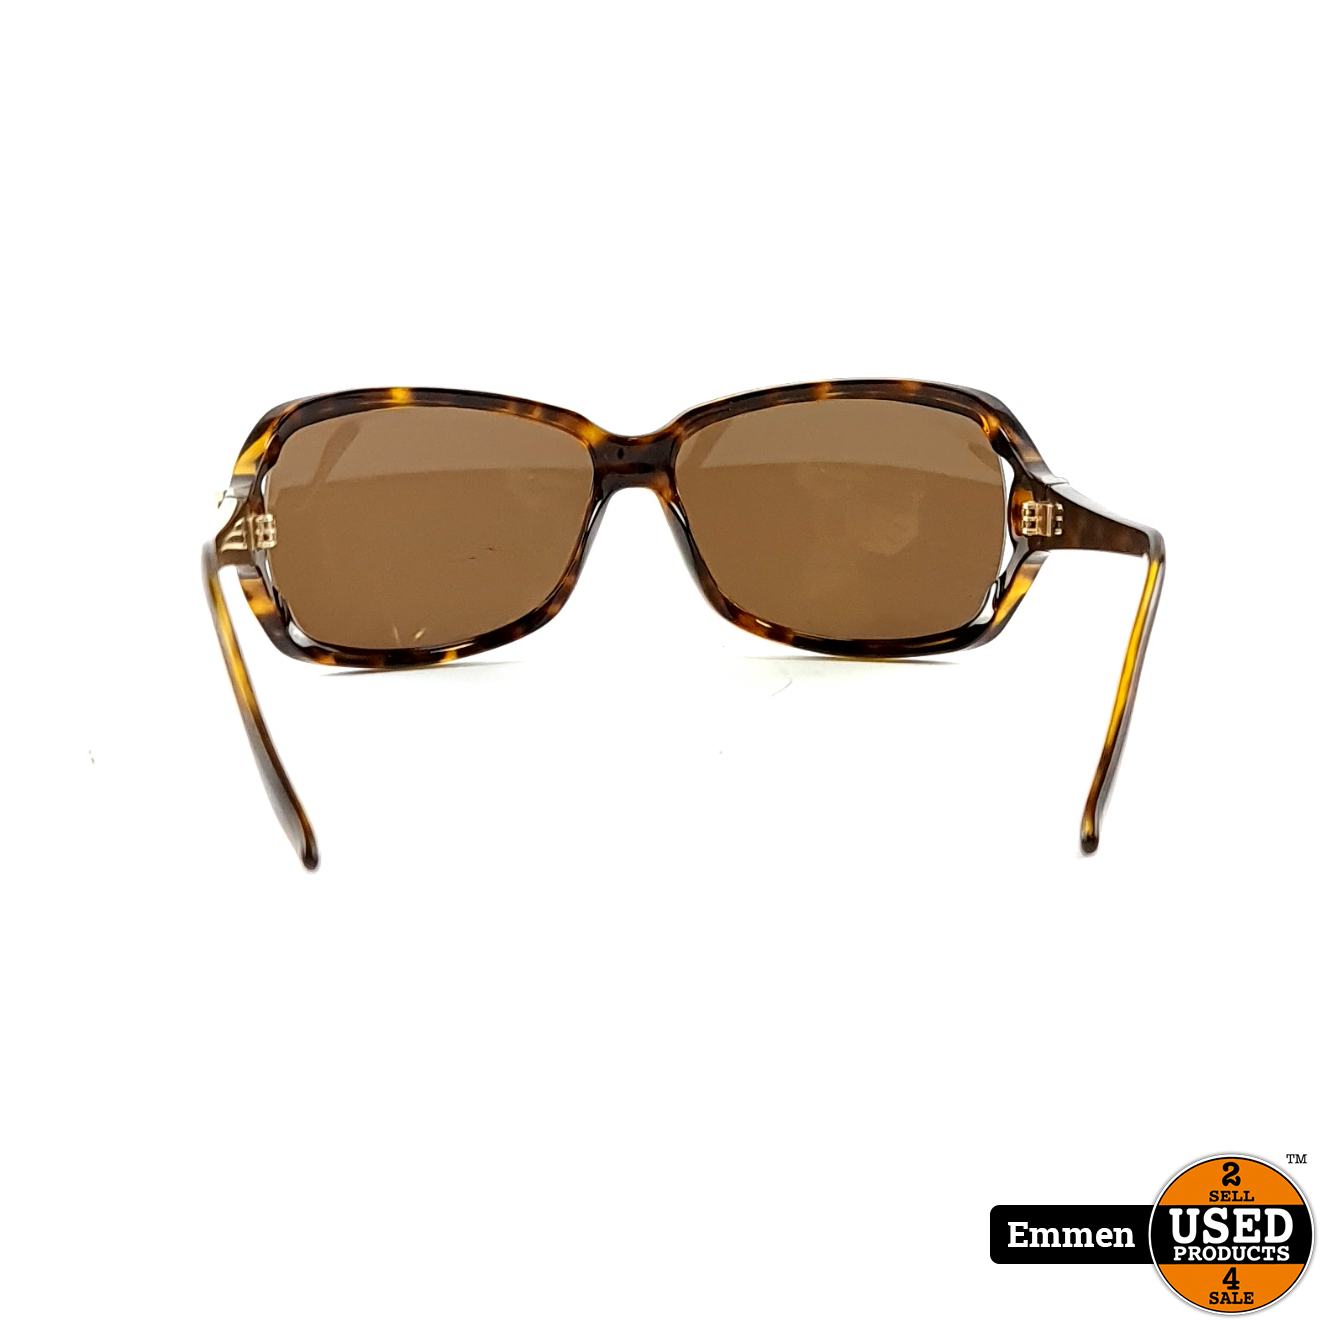 Gucci GG 2995/S Zonnebril 59/13 115 Hoes | In Nette Used Products Emmen